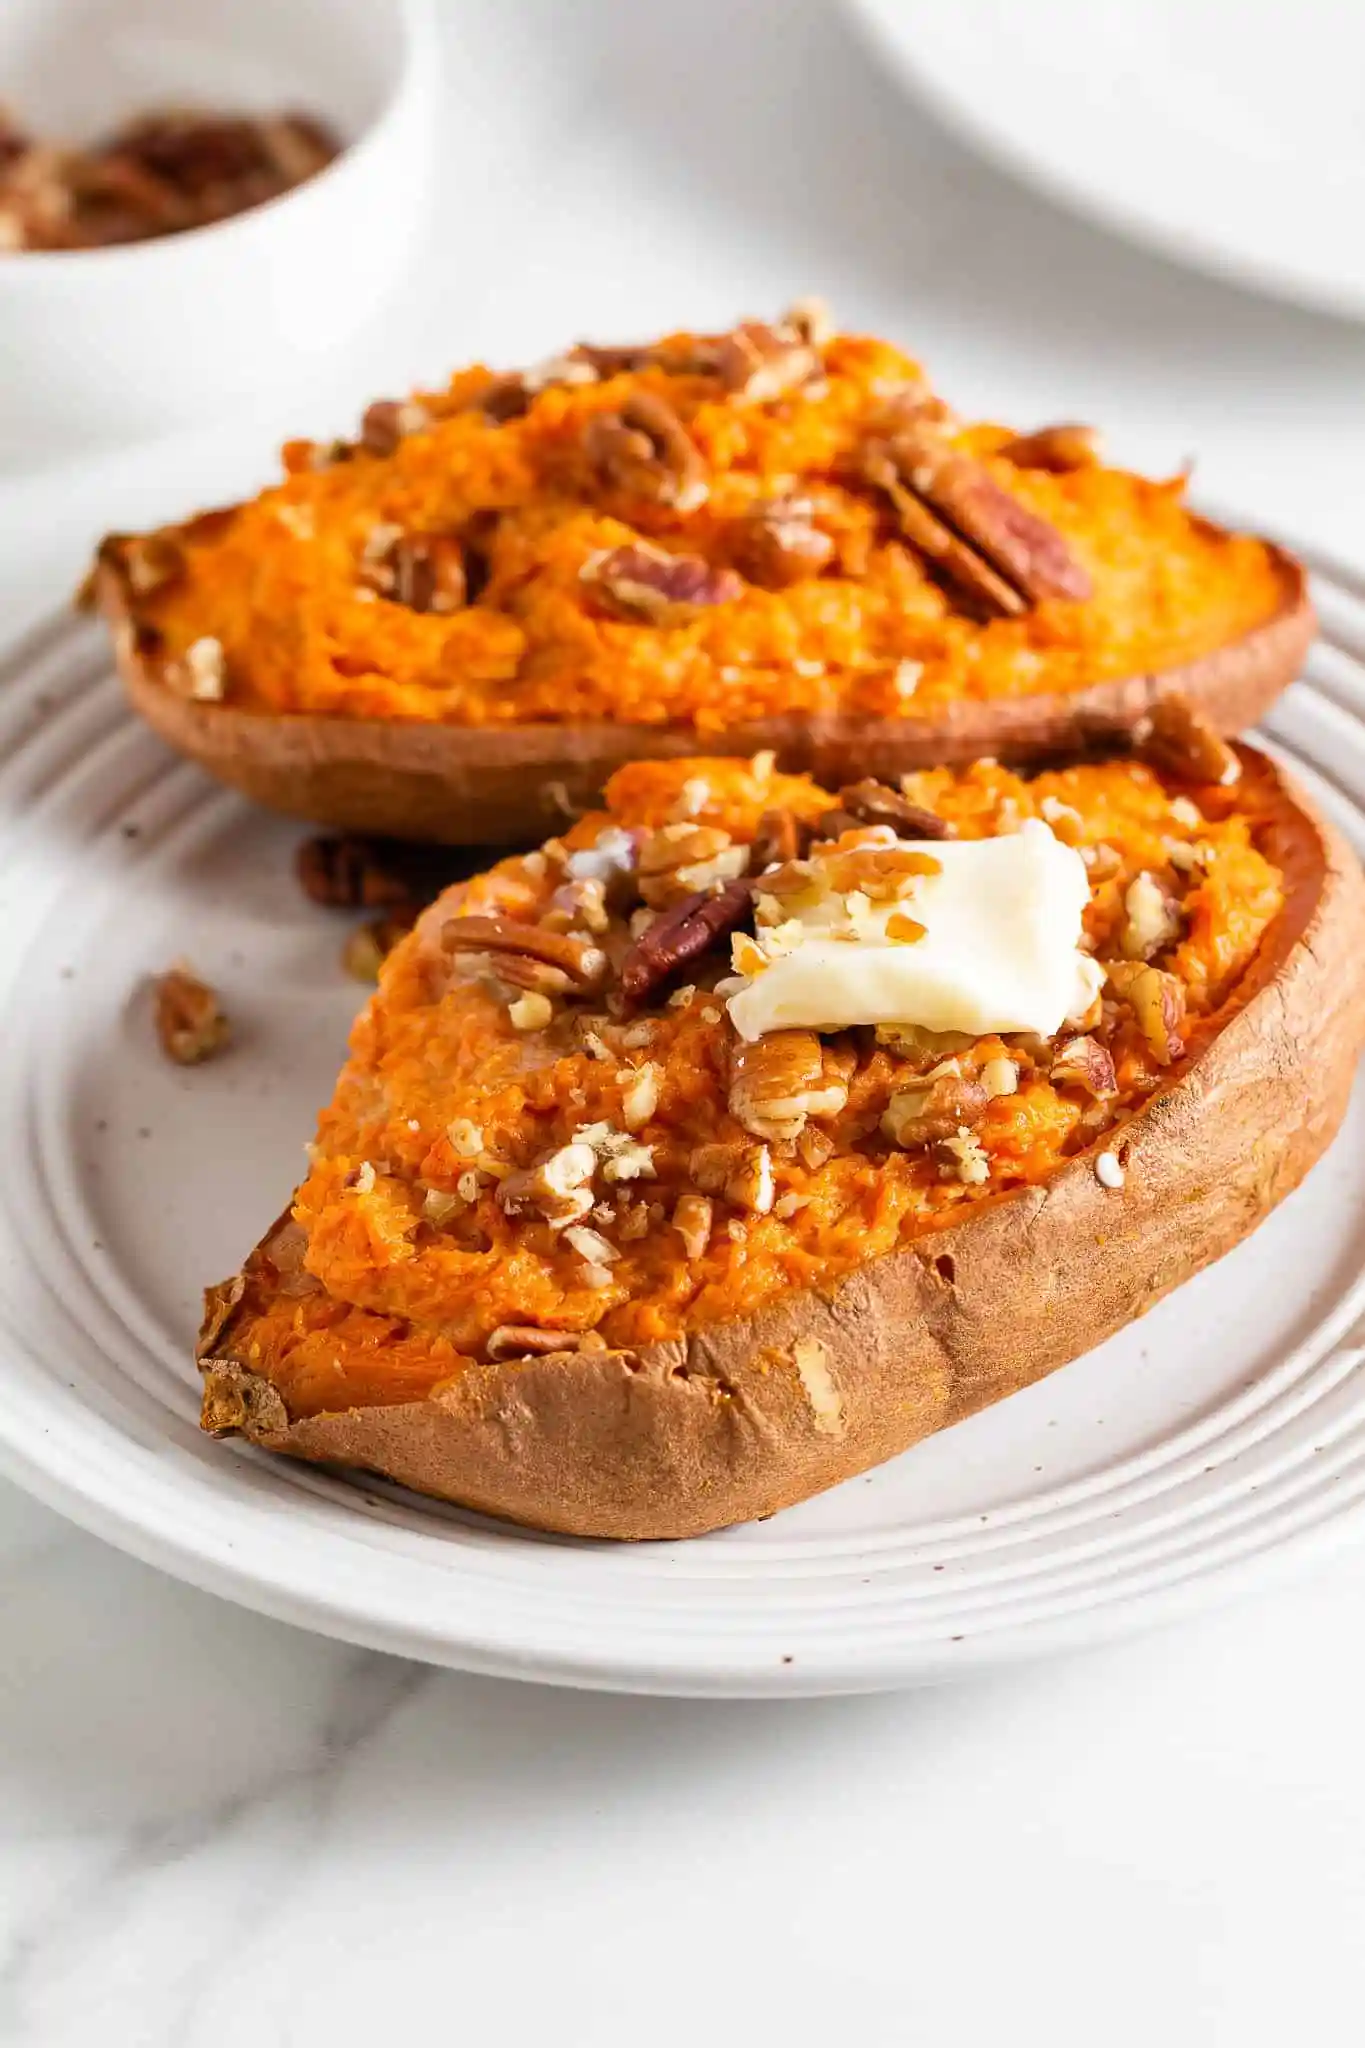 Two roasted sweet potato halves holiday side dish topped with pecans and a slice of melted butter on top of a round white plate.